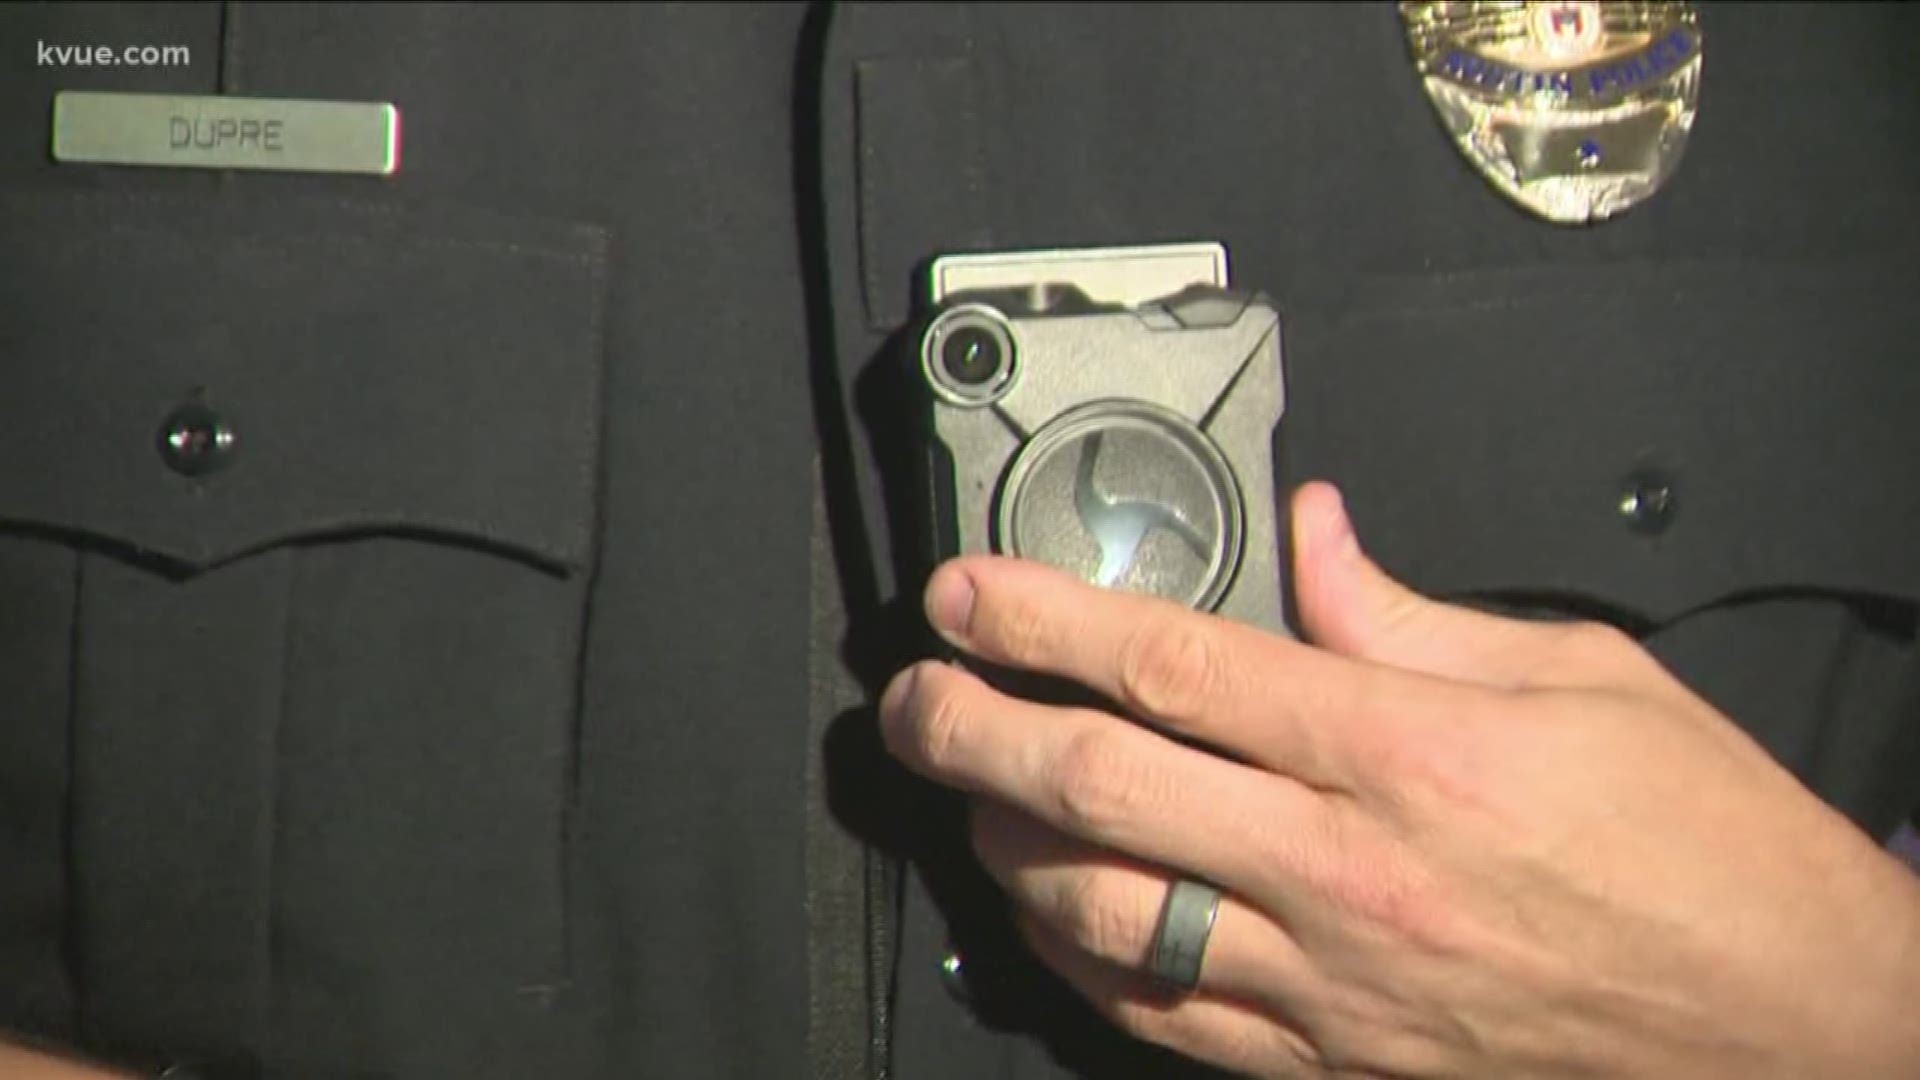 Austin city leaders are calling for more transparency and new policies in how Austin police will release body camera footage.